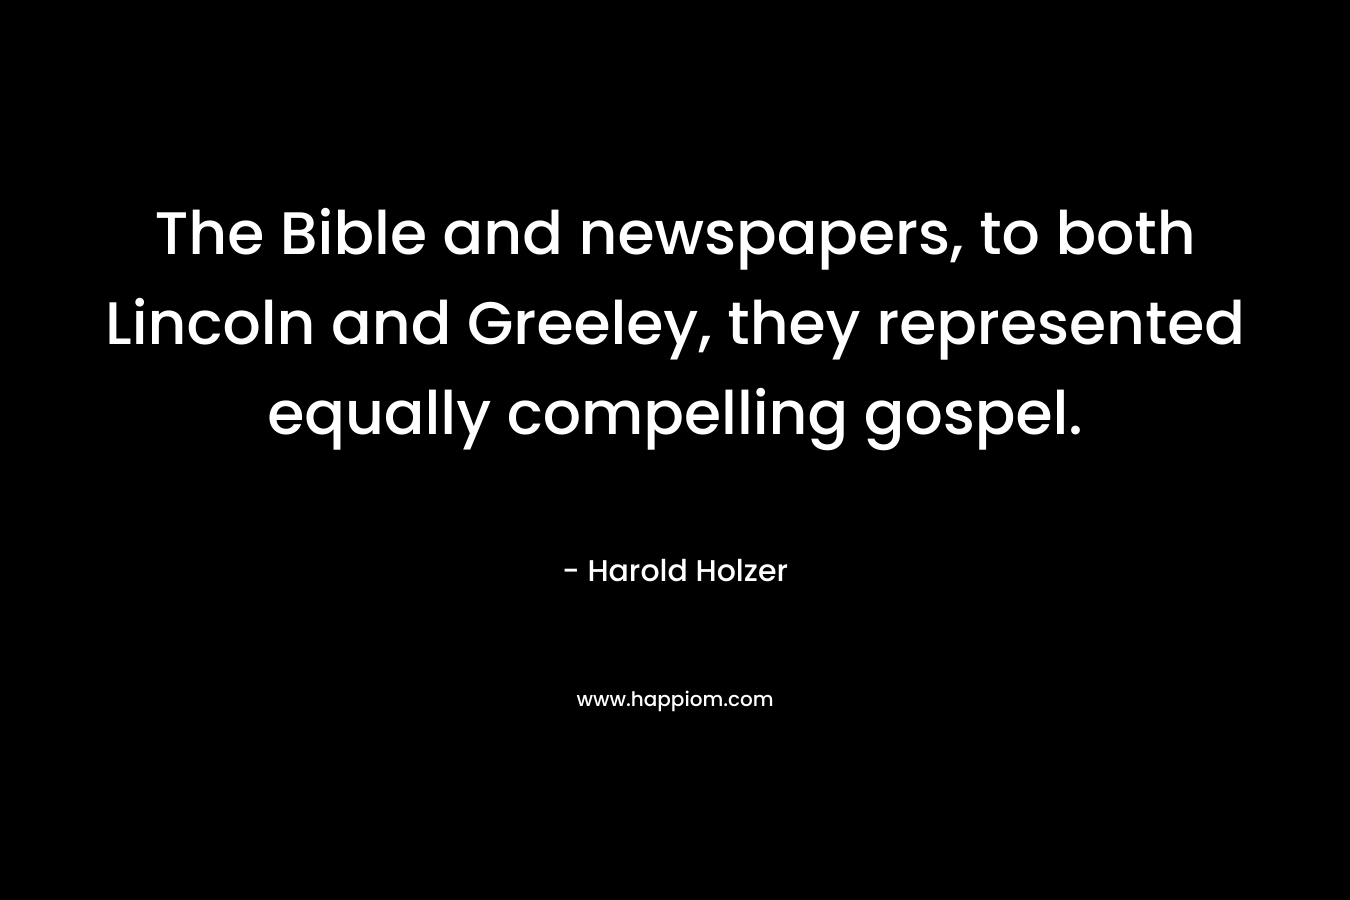 The Bible and newspapers, to both Lincoln and Greeley, they represented equally compelling gospel. – Harold Holzer